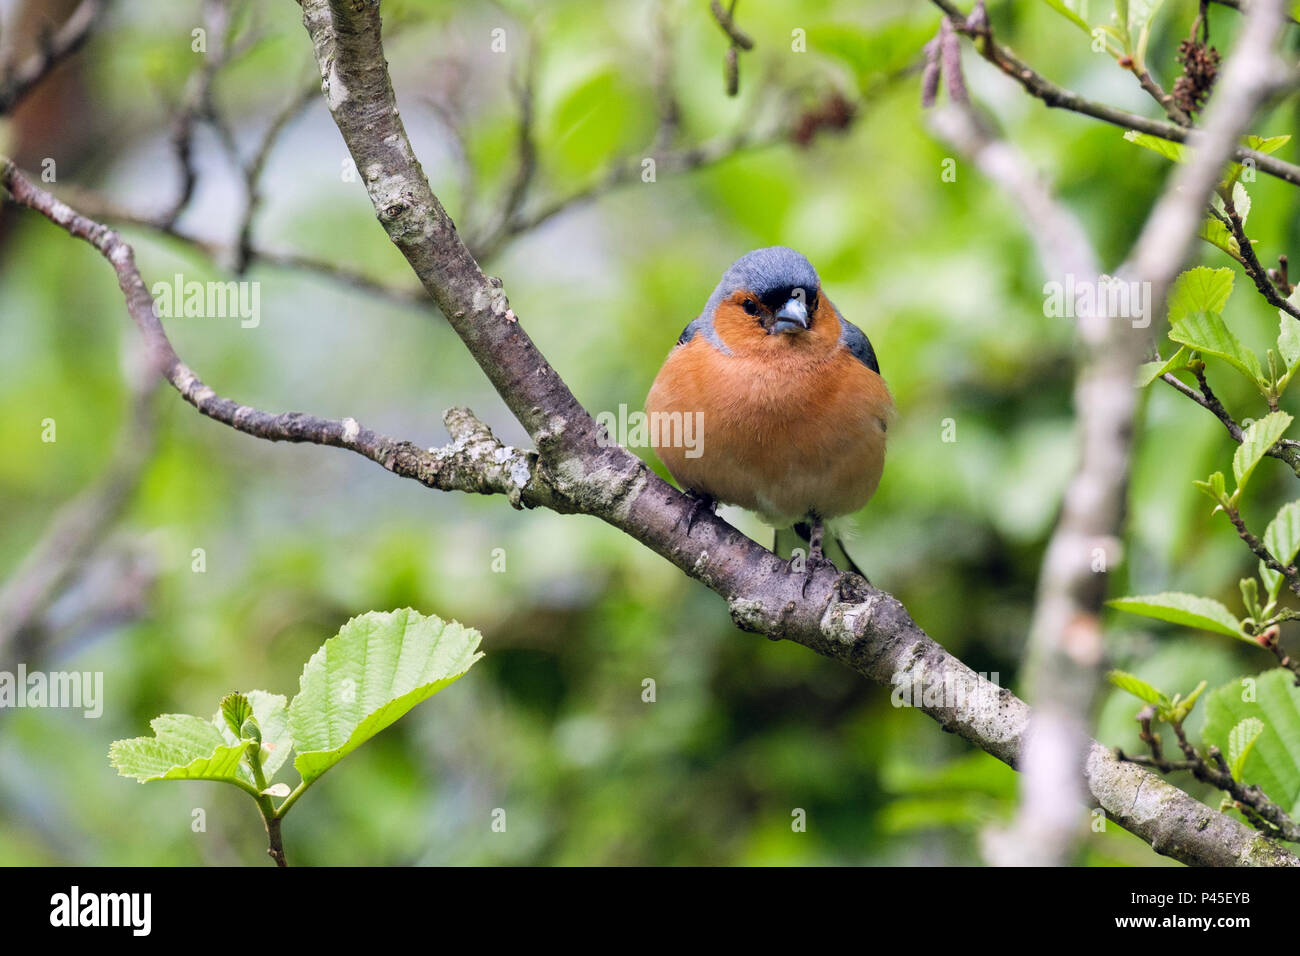 British nature a male Common Chaffinch (Fringilla coelebs) bird in spring plumage on a Beech tree branch in a garden hedgerow. Wales, UK, Britain Stock Photo